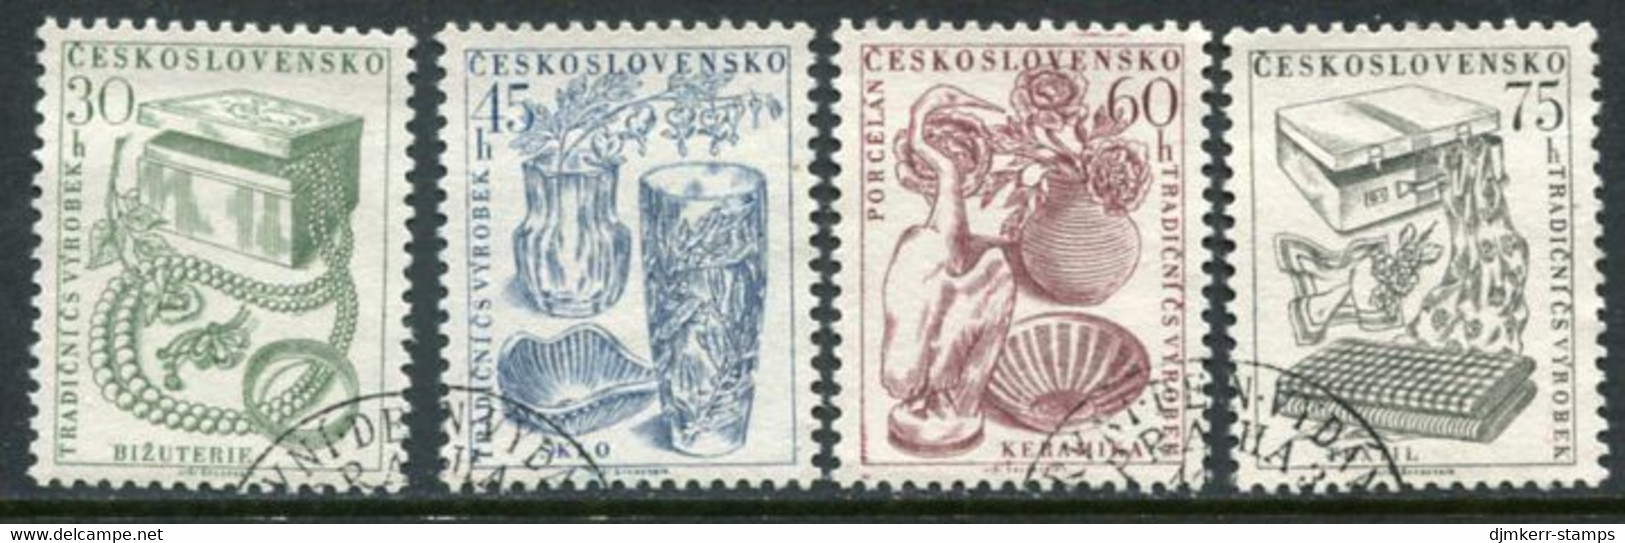 CZECHOSLOVAKIA 1956 Export Products Used.  Michel 954-57 - Gebraucht